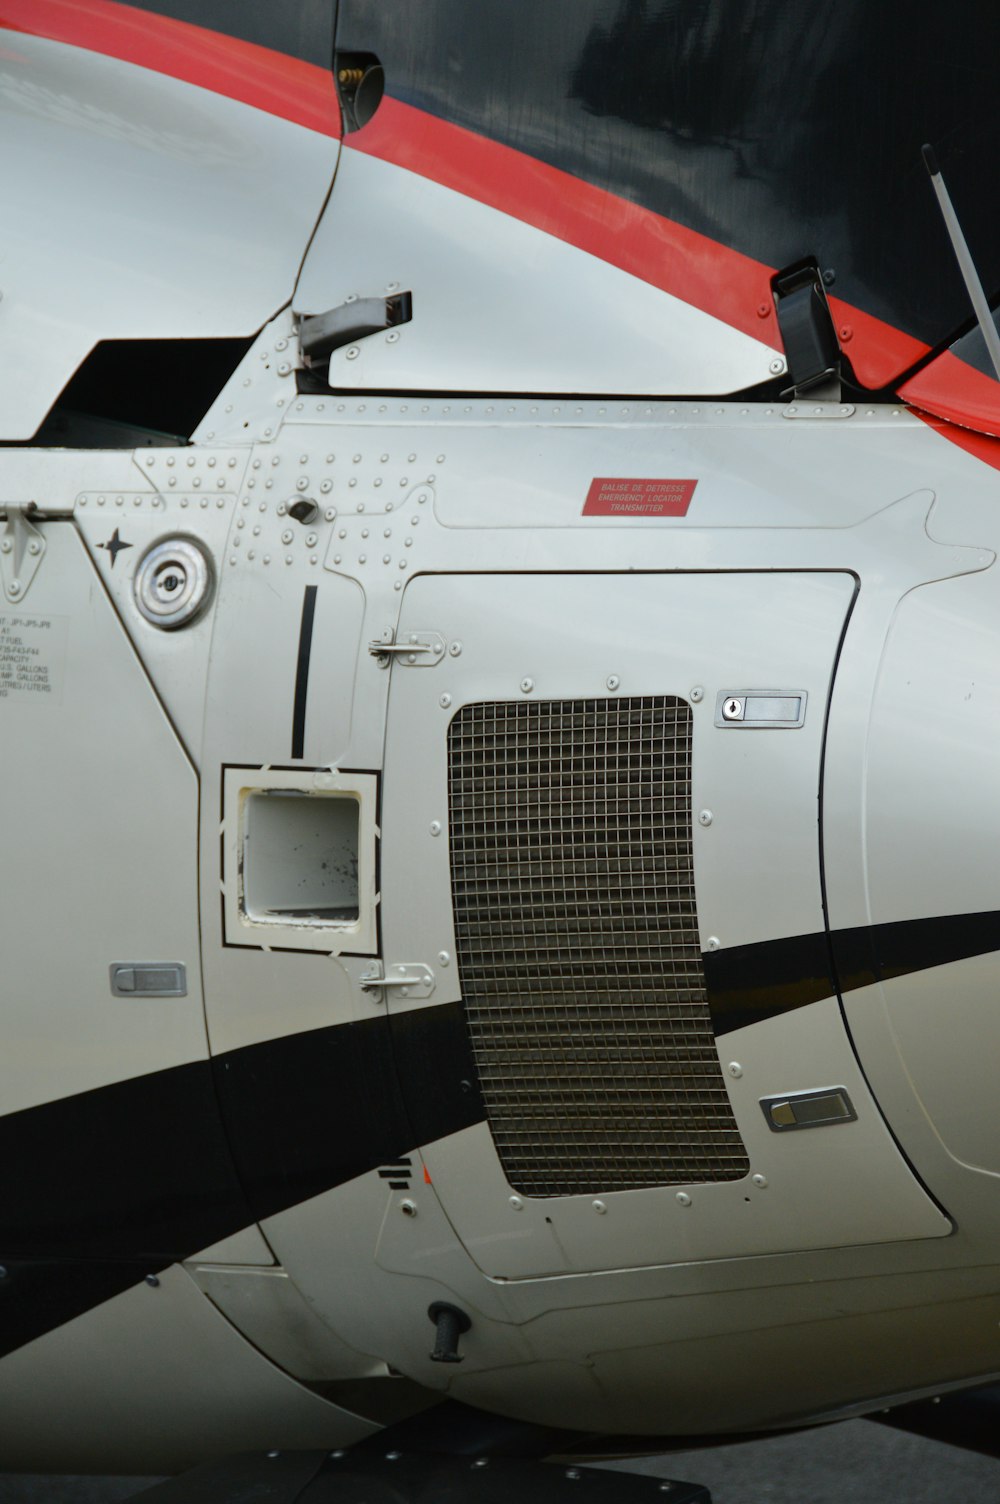 a close up of the nose of a plane